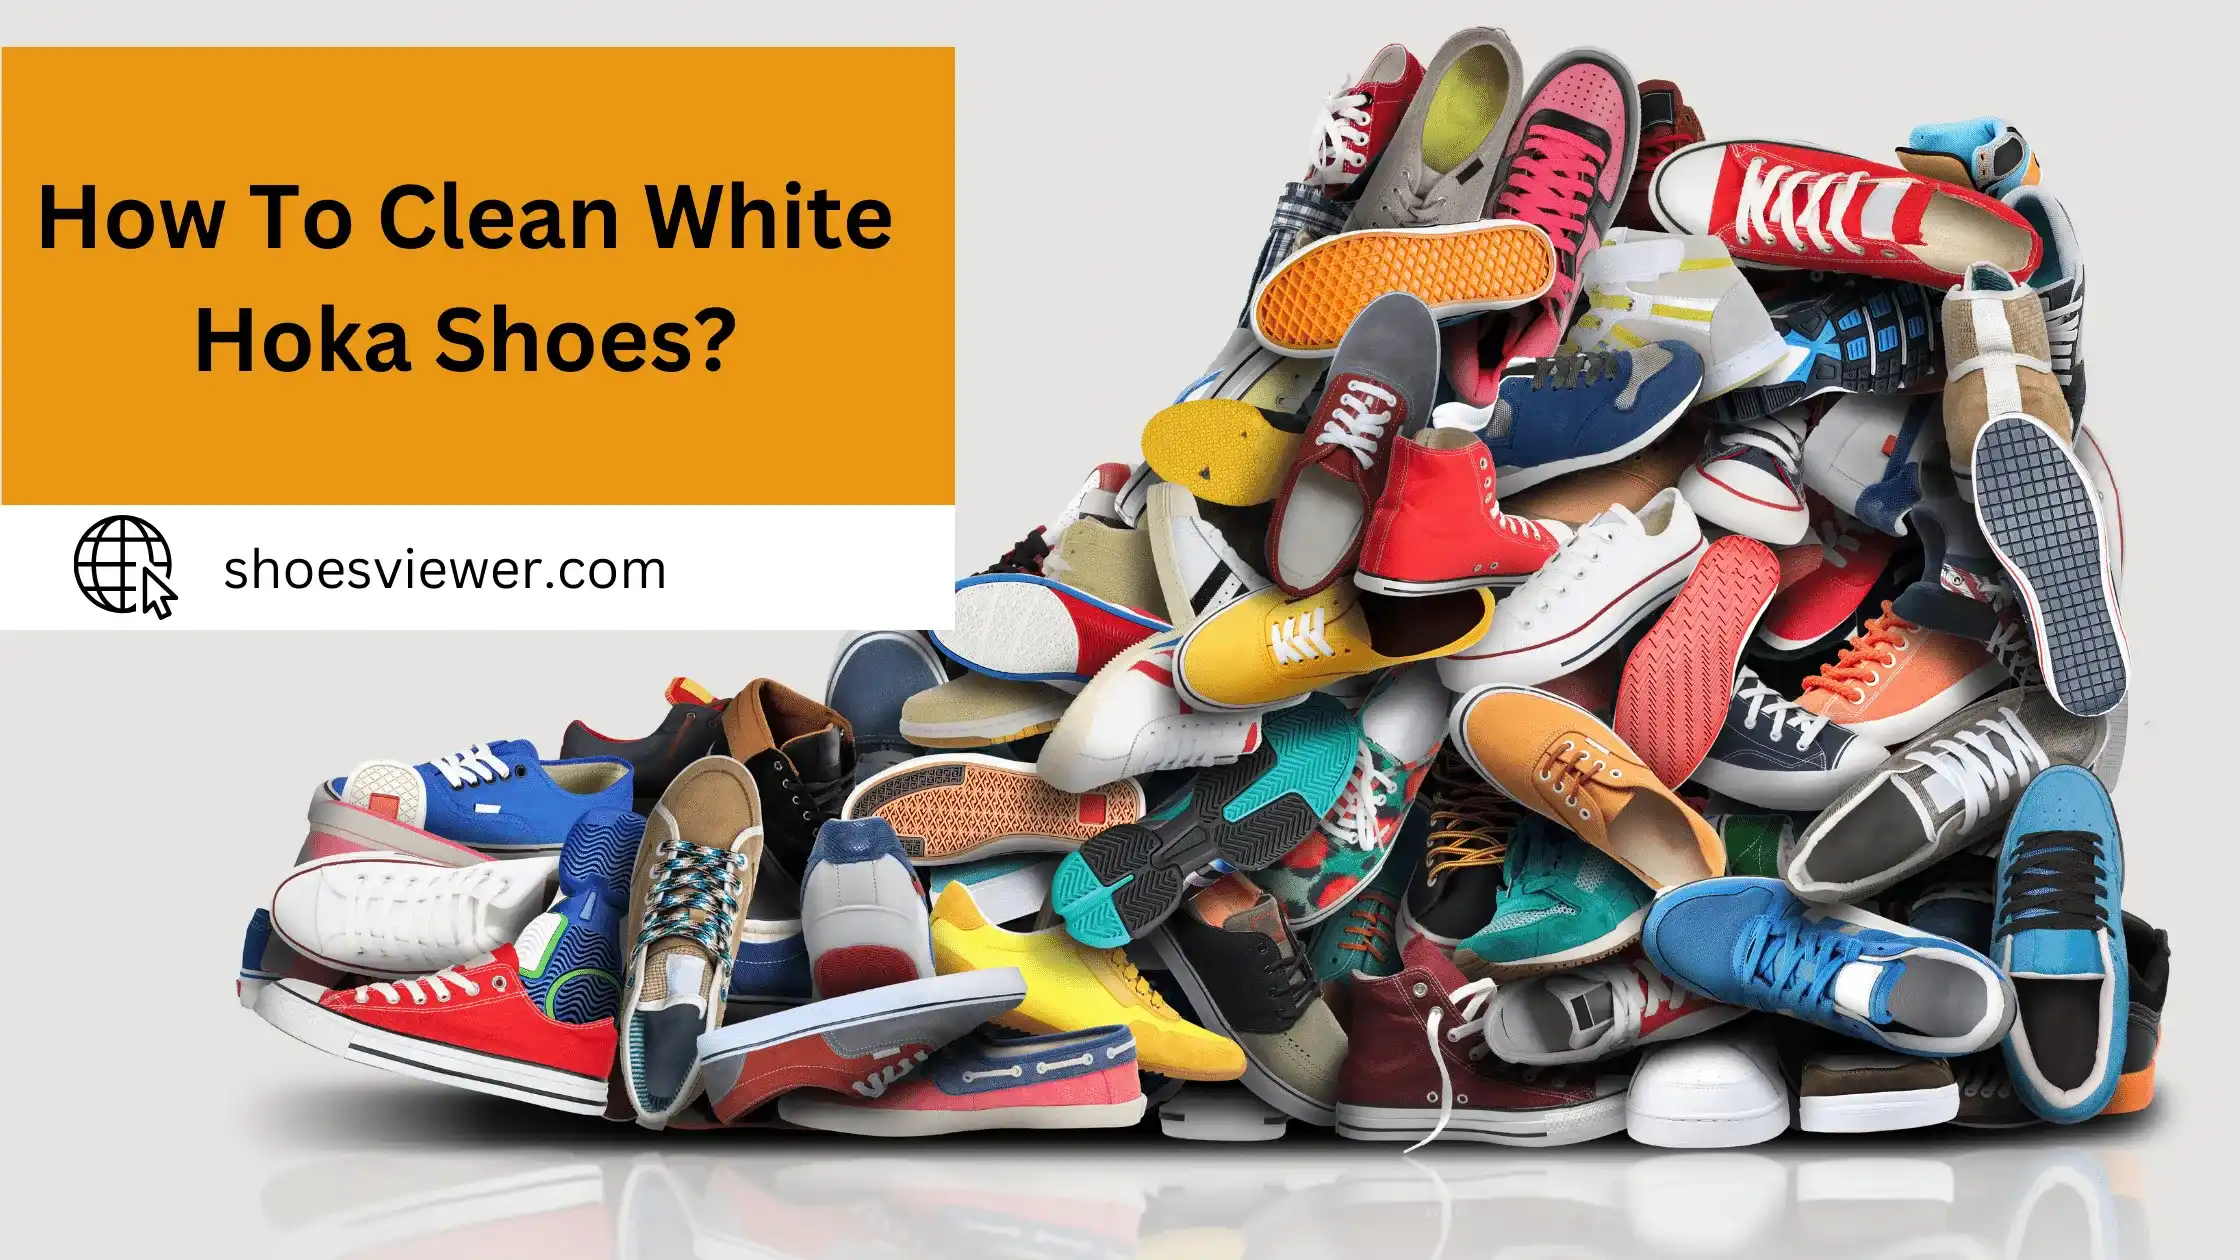 How To Clean White Hoka Shoes? (Step-by-Step Instructions)